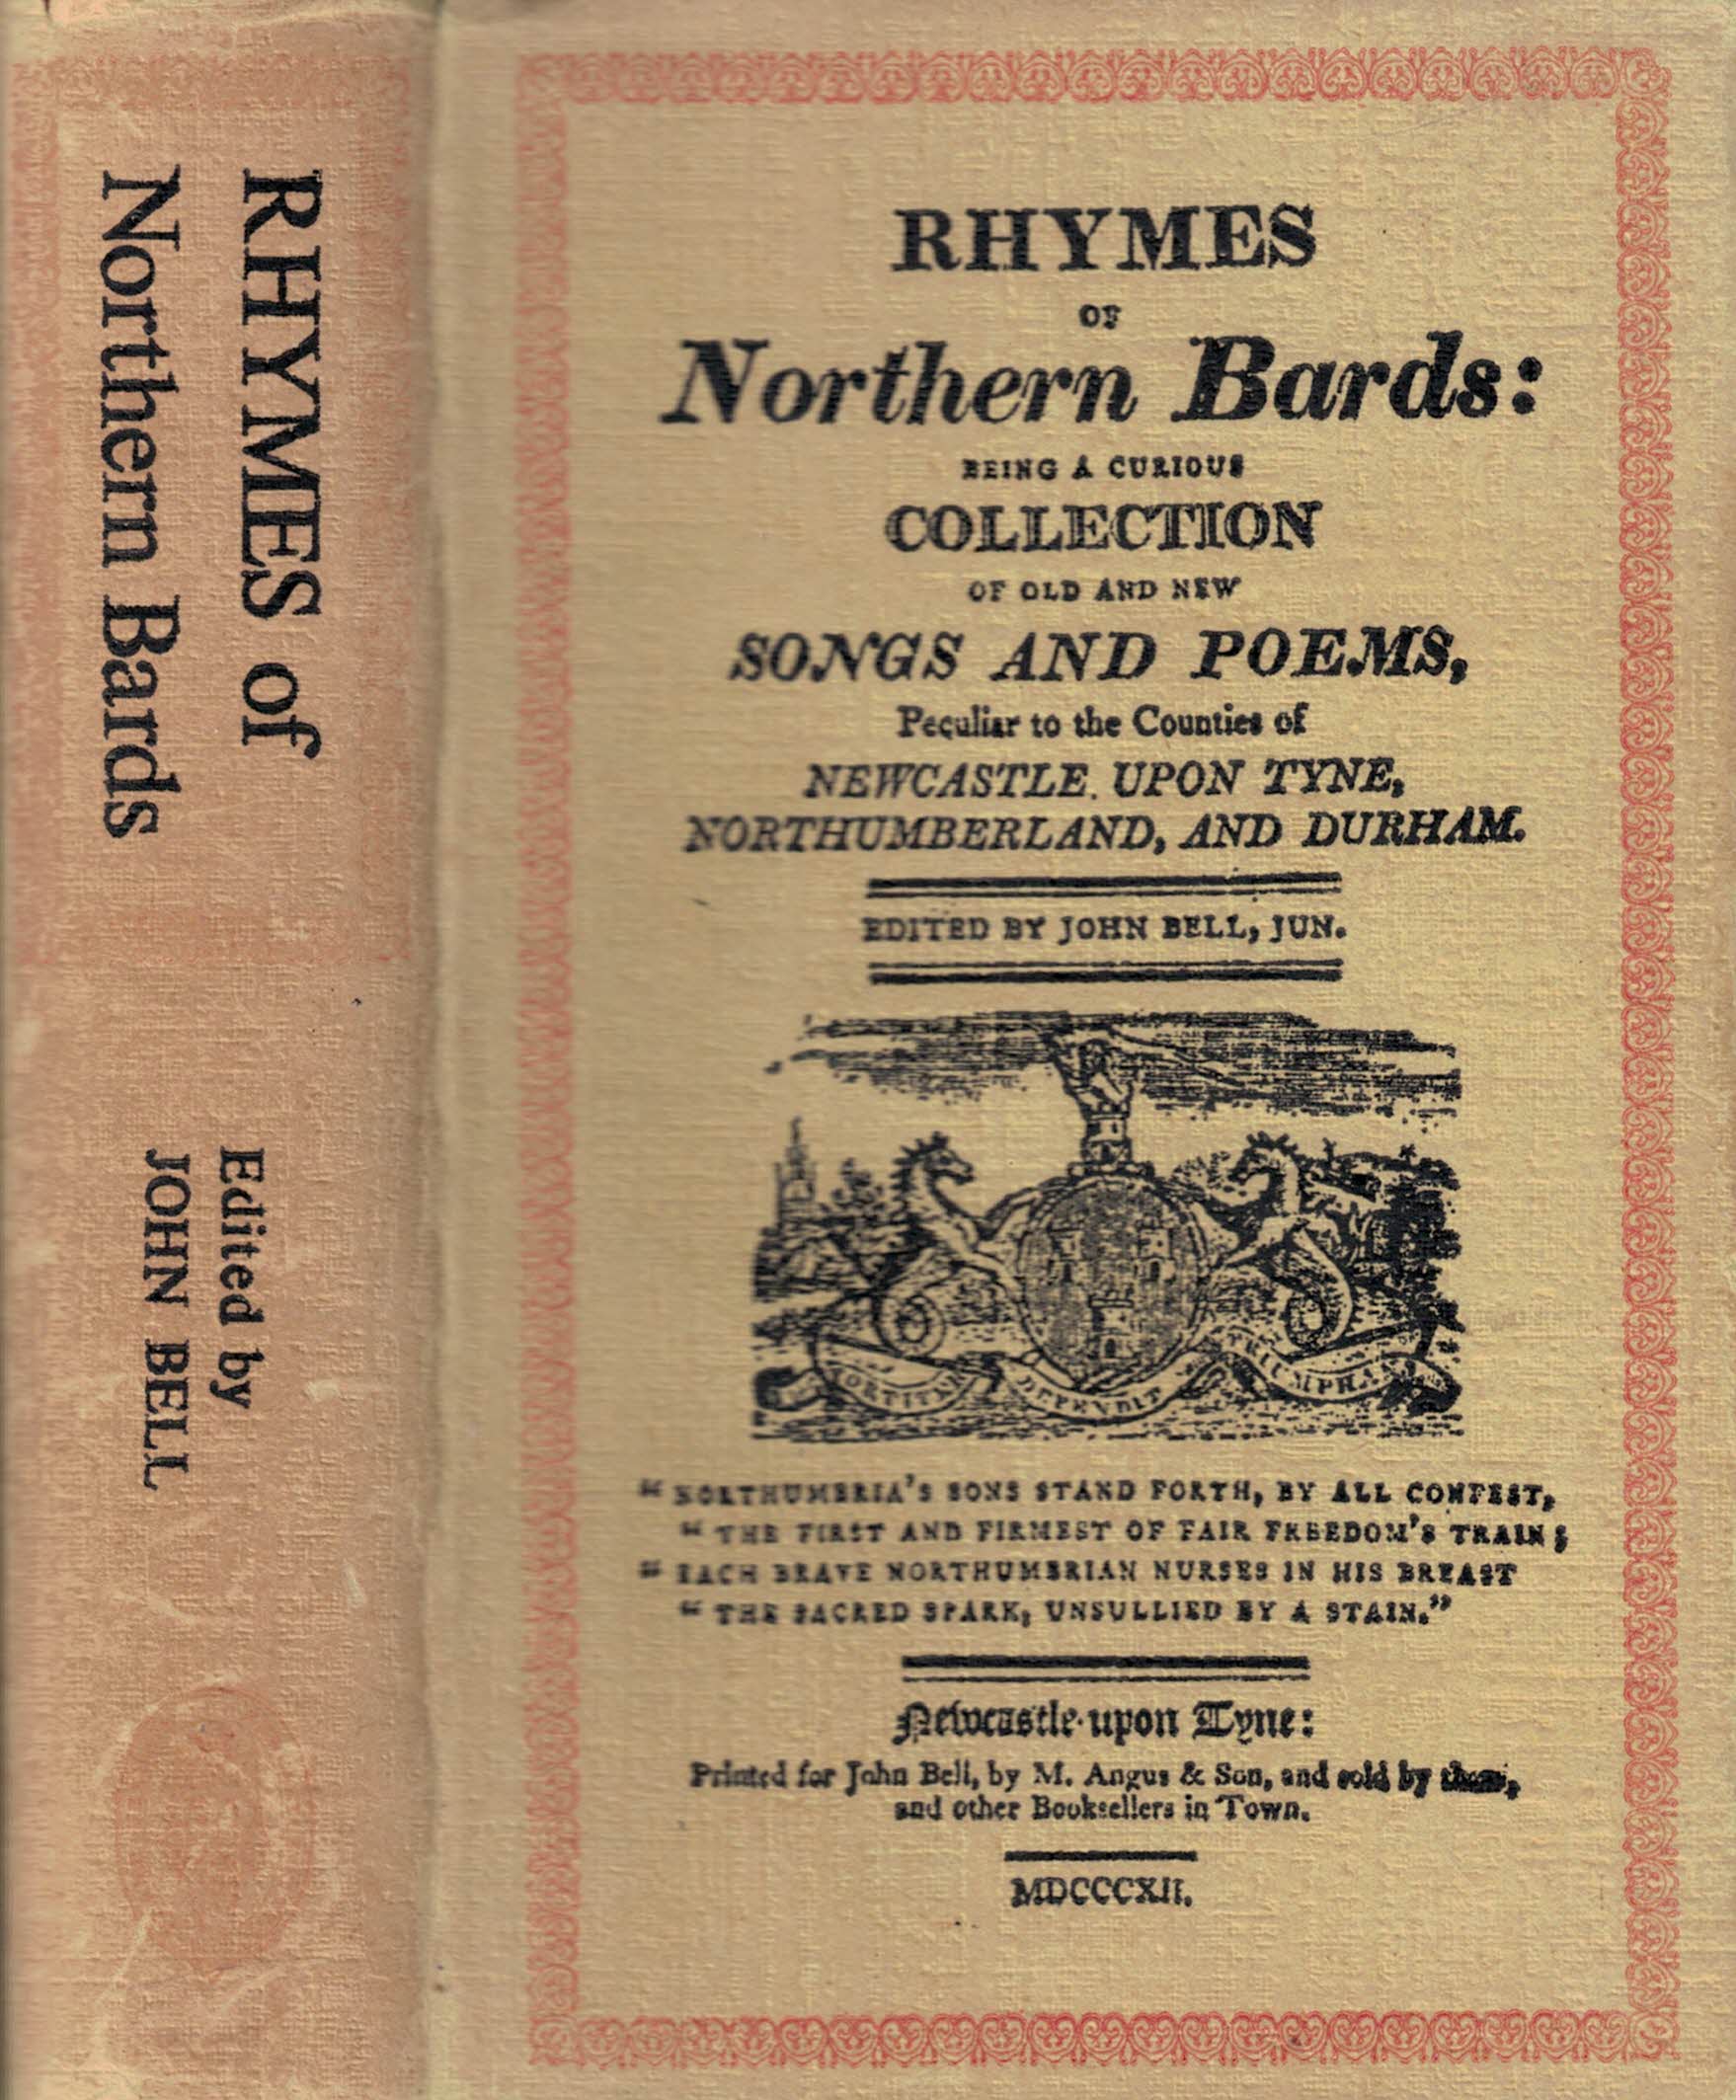 Rhymes of Northern Bards. Being a Curious Collection of Old and New Songs and Poems Peculiar to the Counties of Newcastle Upon Tyne, Northumberland and Durham.